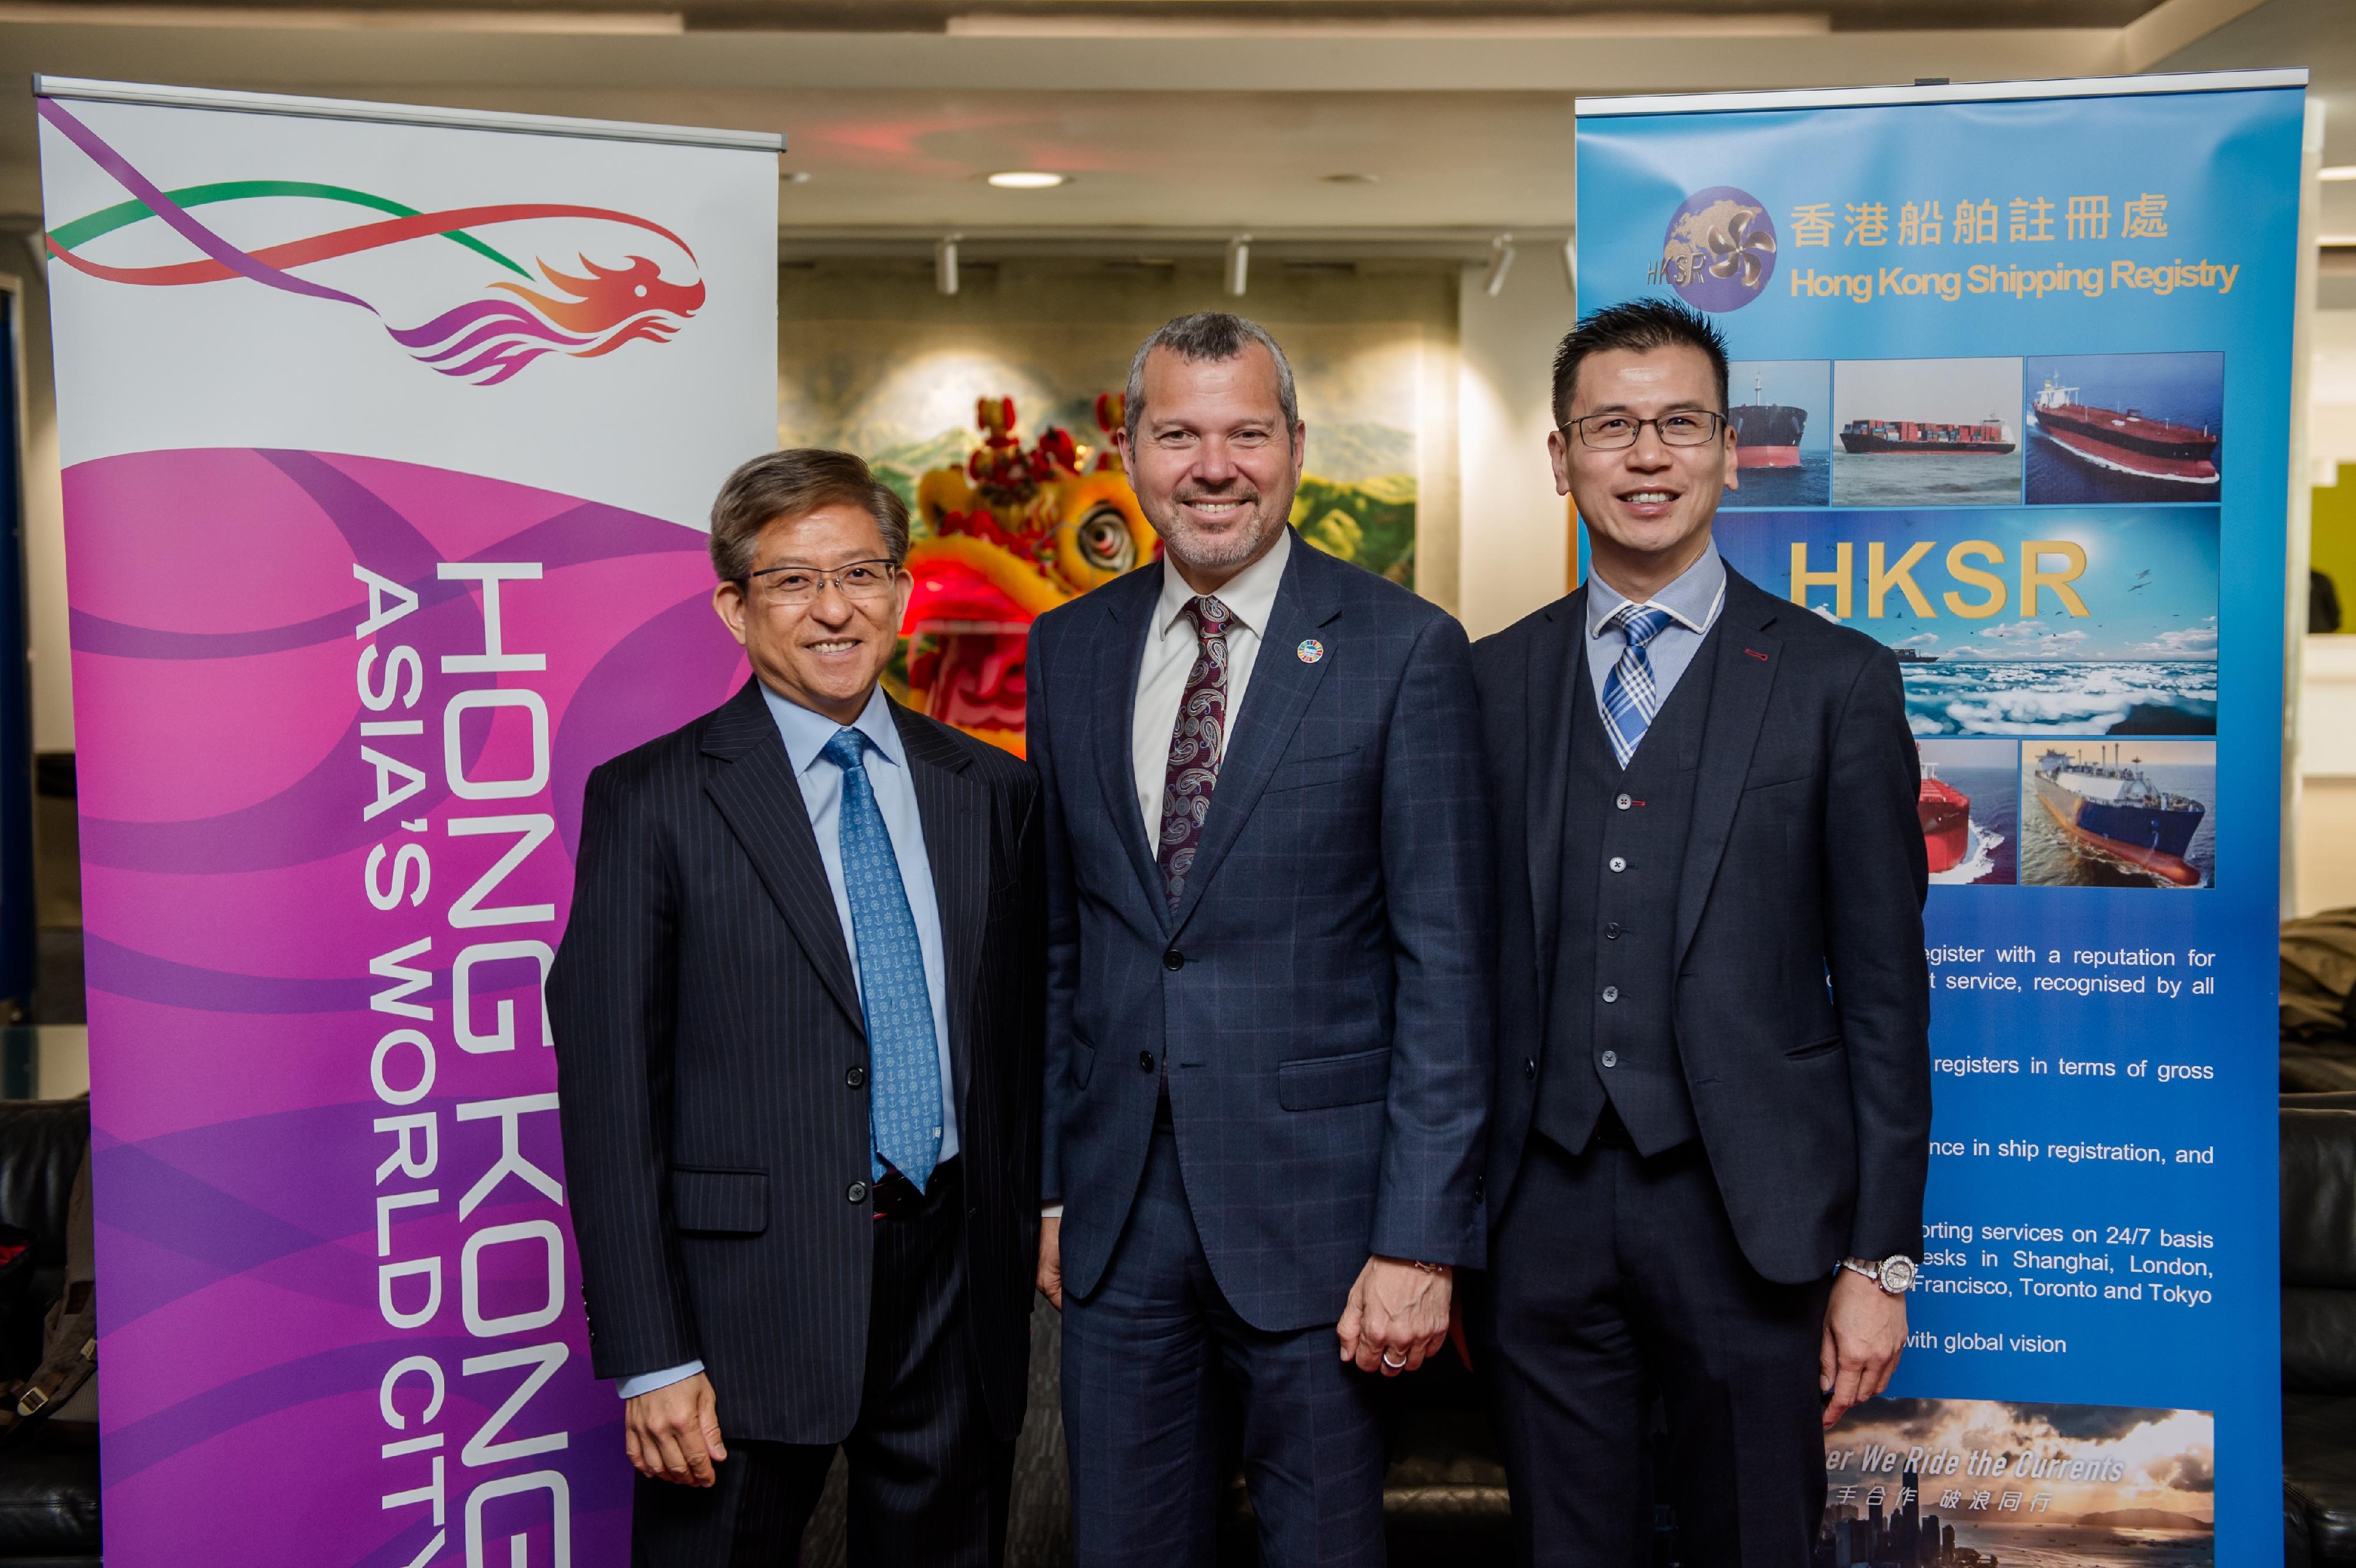 The Hong Kong Economic and Trade Office, London (London ETO), with the support of the Marine Department, held the Taste of Hong Kong reception at the International Maritime Organization (IMO) on May 23 (London time). Photo shows the Marine Adviser, Permanent Representative to the IMO and Regional Head (London) of the Hong Kong Shipping Registry, Mr Ben Lau (left); the Secretary-General of the IMO, Mr Arsenio Dominguez (centre); and the Director-General of London ETO, Mr Gilford Law (right), at the reception.